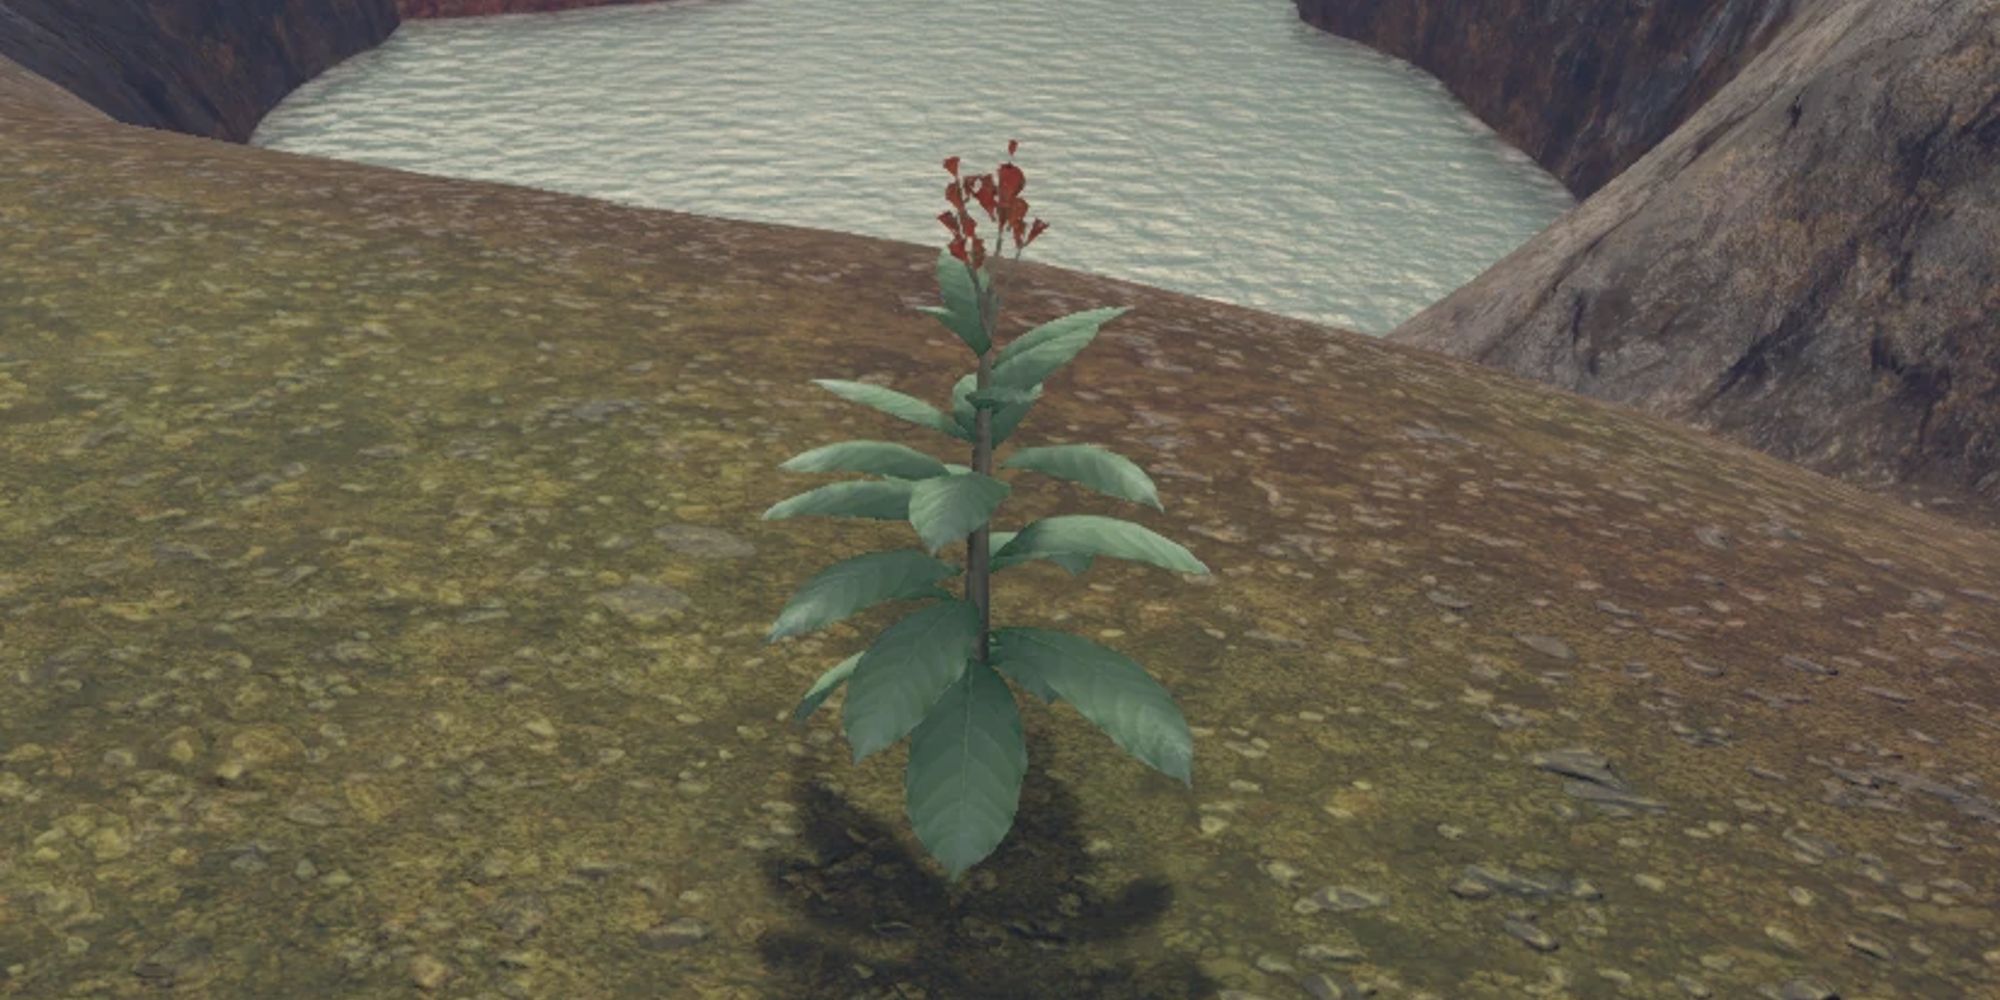 ambraine plant growing from ground